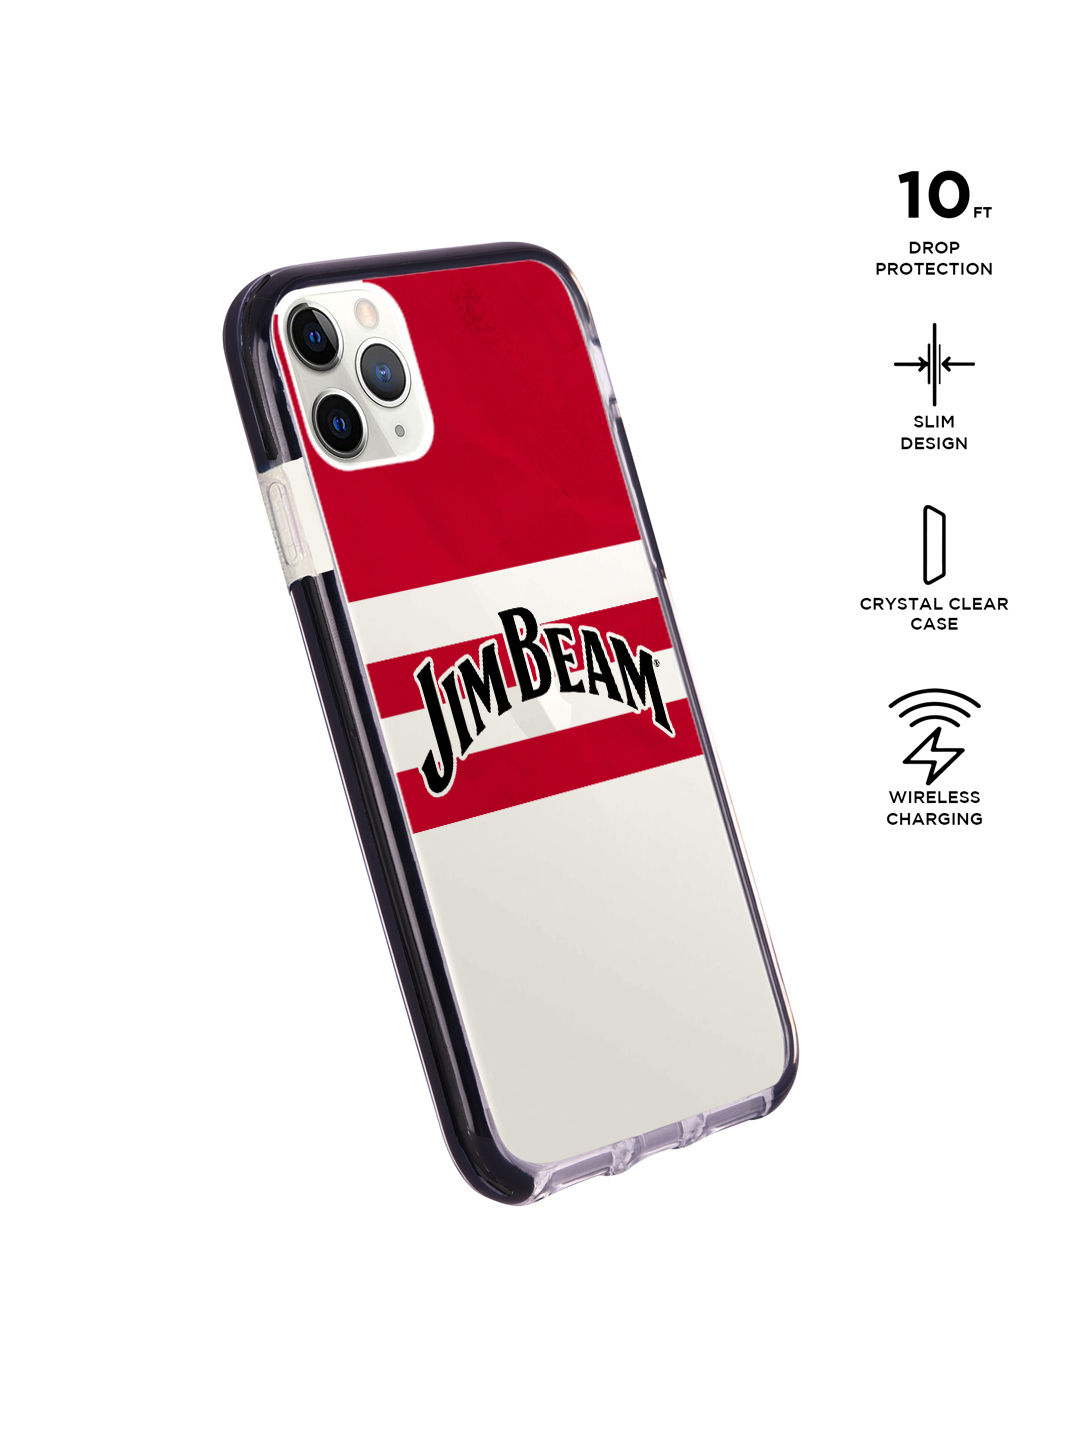 Jim Beam Red Stripes - Shield Case for iPhone 11 Pro